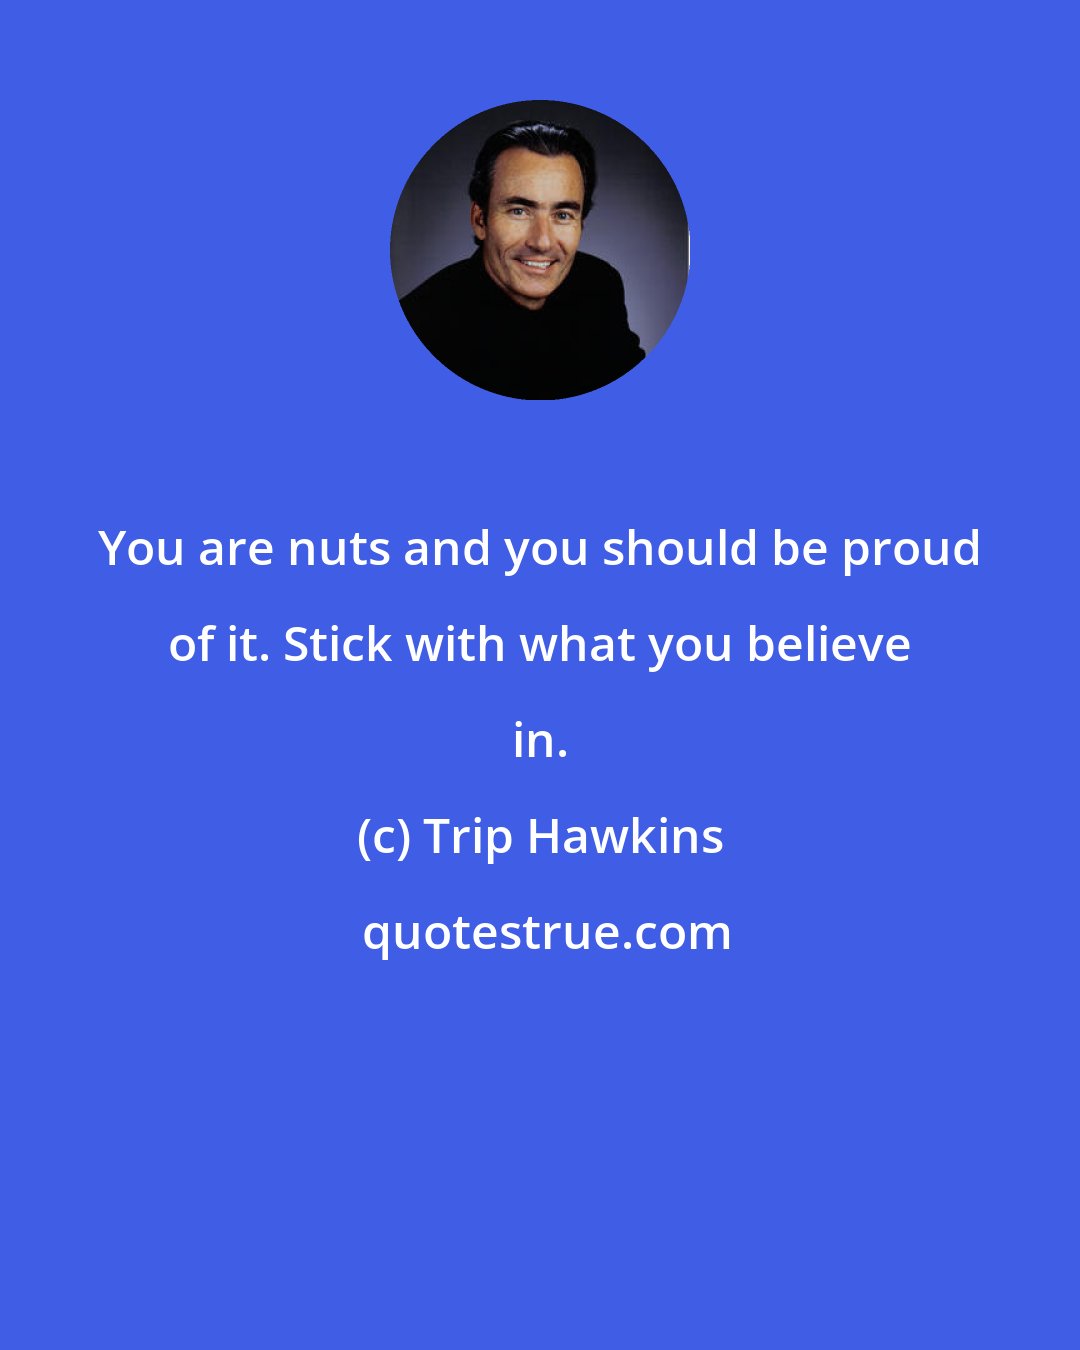 Trip Hawkins: You are nuts and you should be proud of it. Stick with what you believe in.